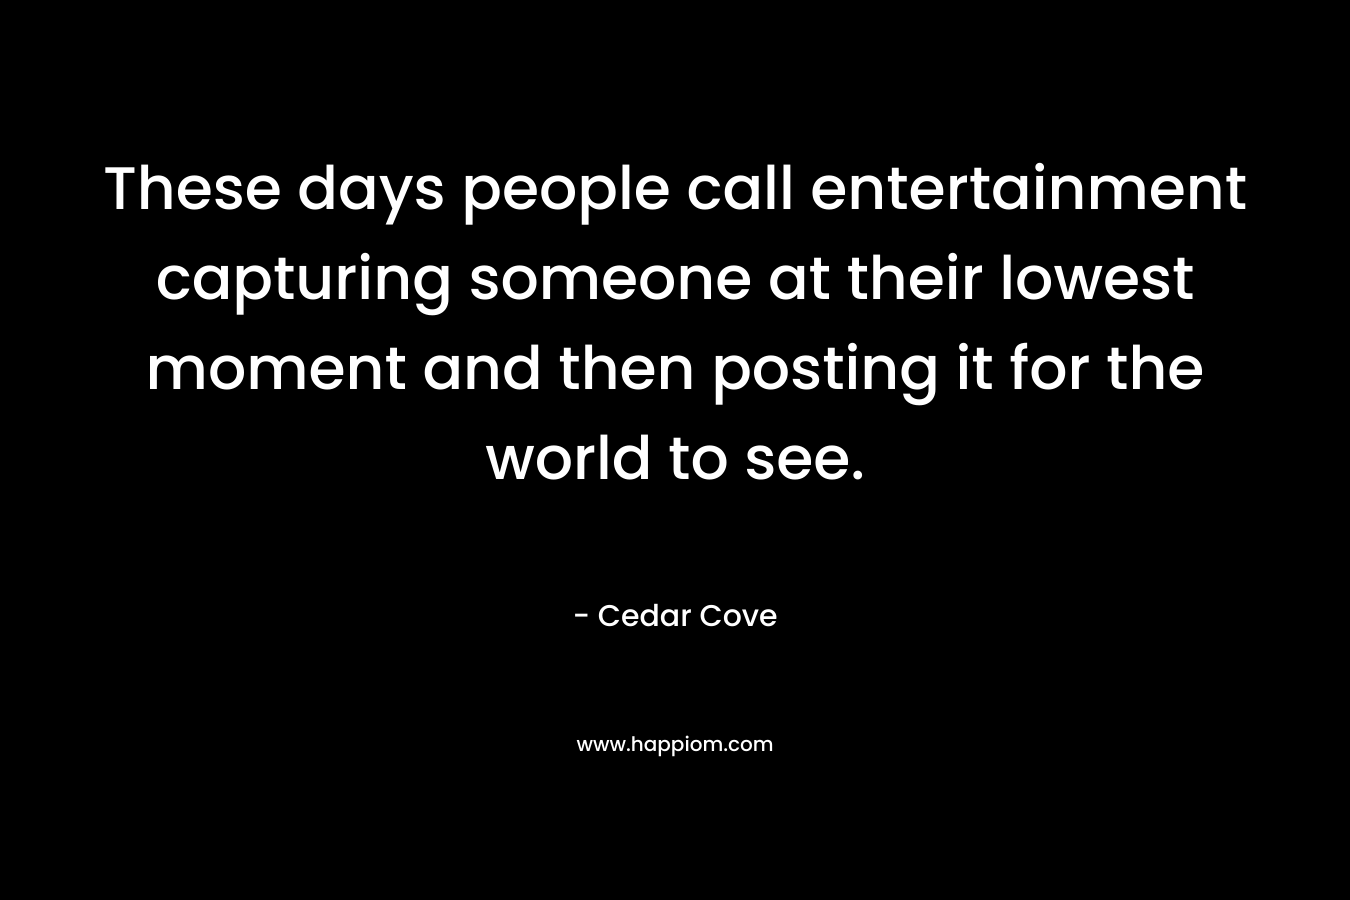 These days people call entertainment capturing someone at their lowest moment and then posting it for the world to see. – Cedar Cove